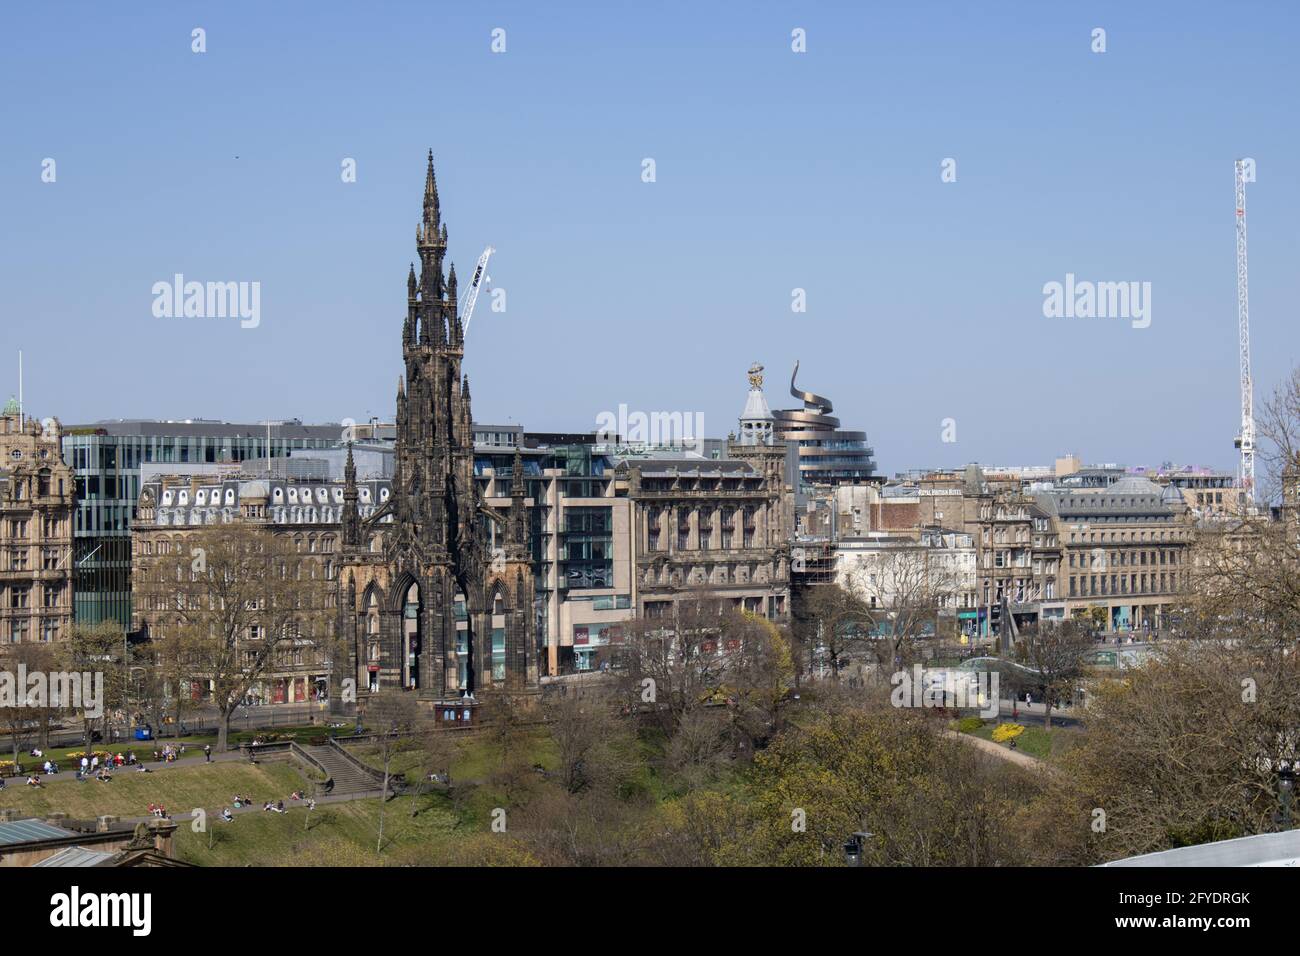 A view of the Edinburgh Skyline and Princes Street, including the Scott Monument and the new St James Centre or 'Golden Turd'. Stock Photo